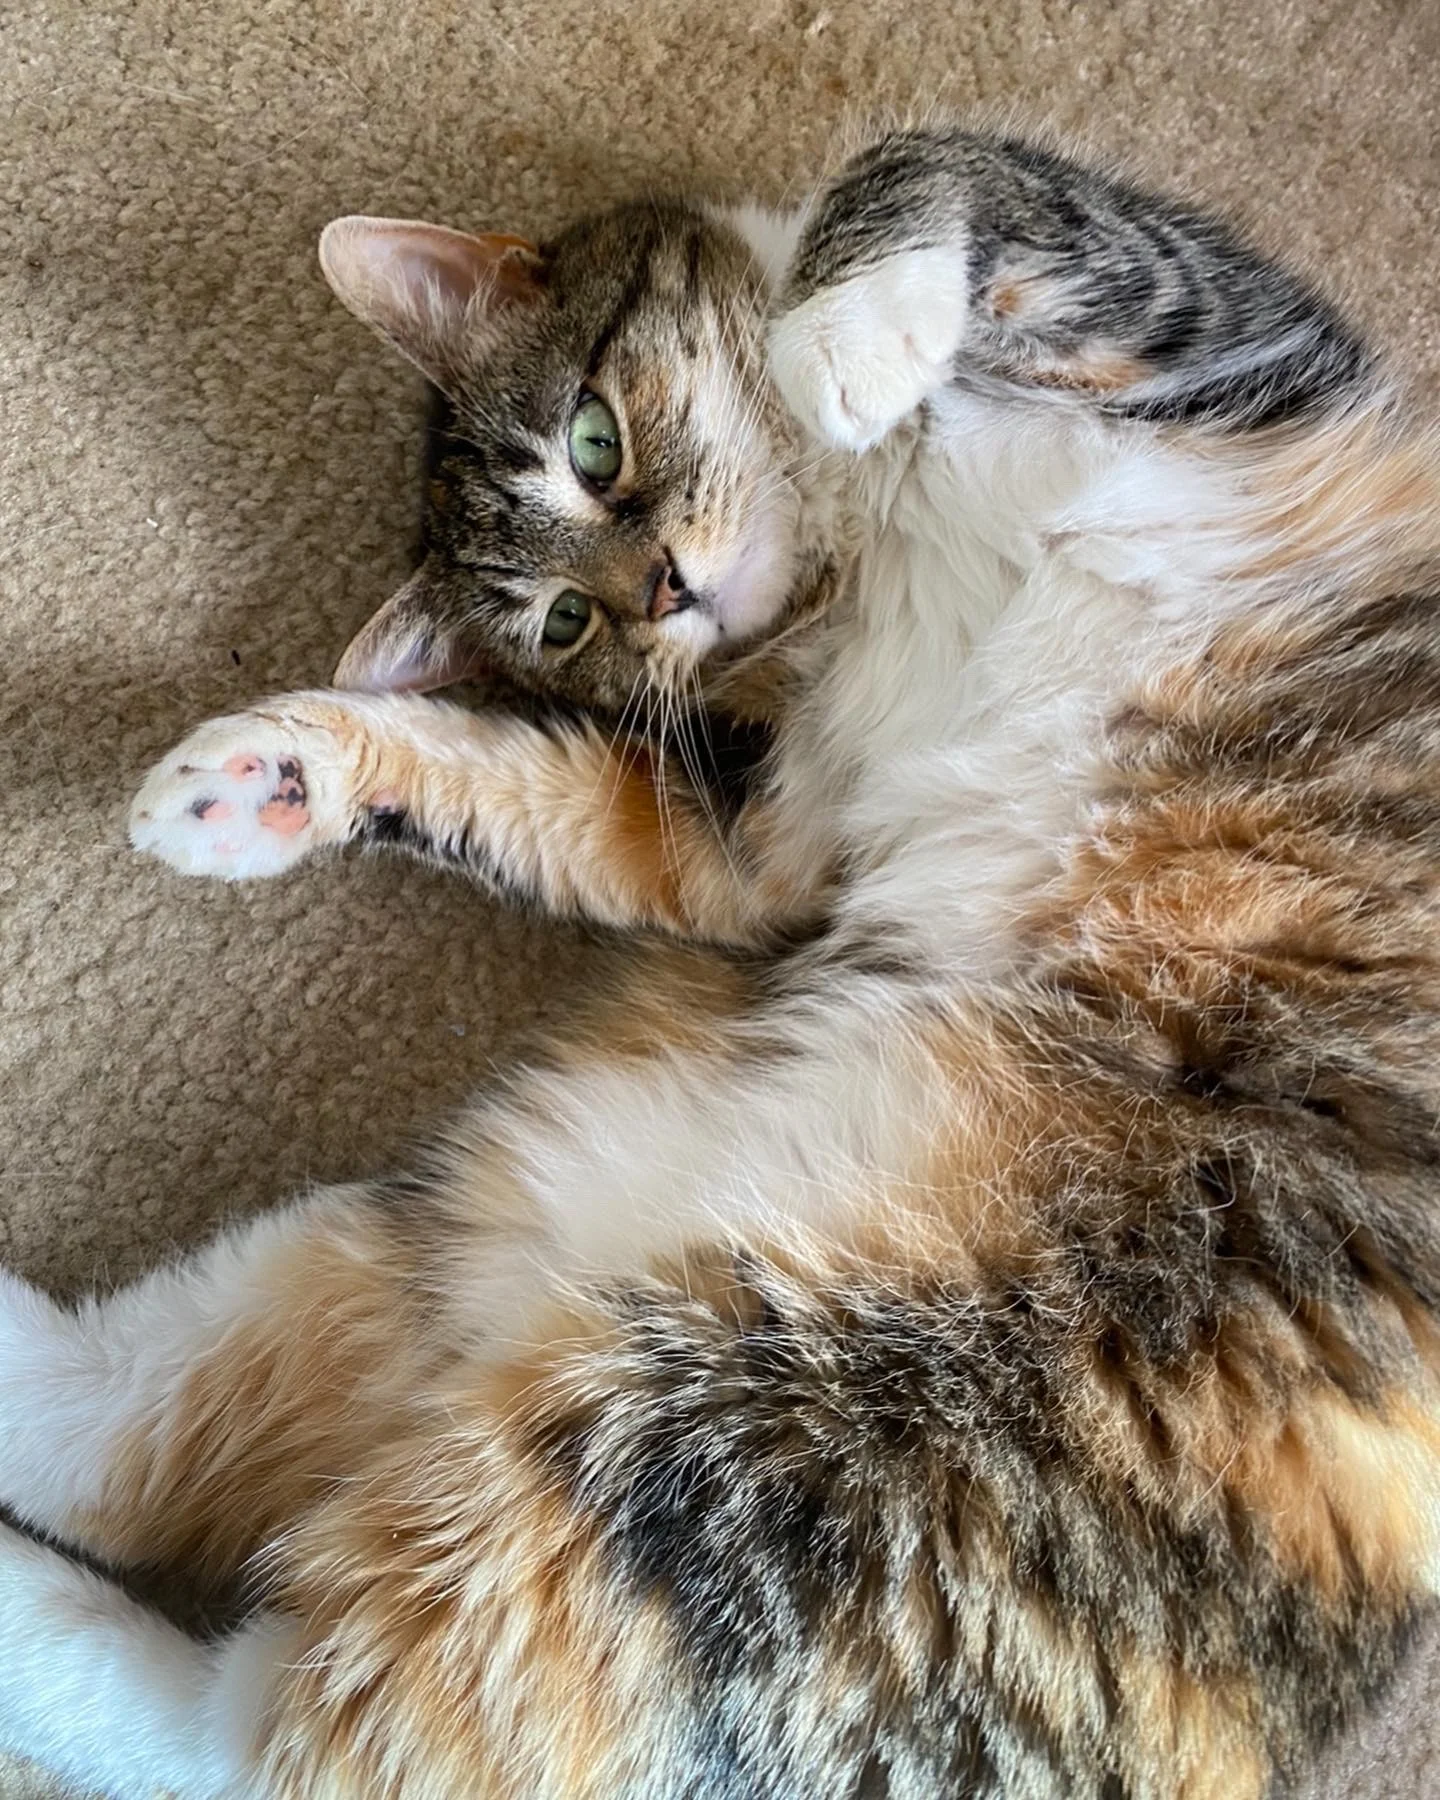 Long haired calico cat rolling on floor showing off their white belly